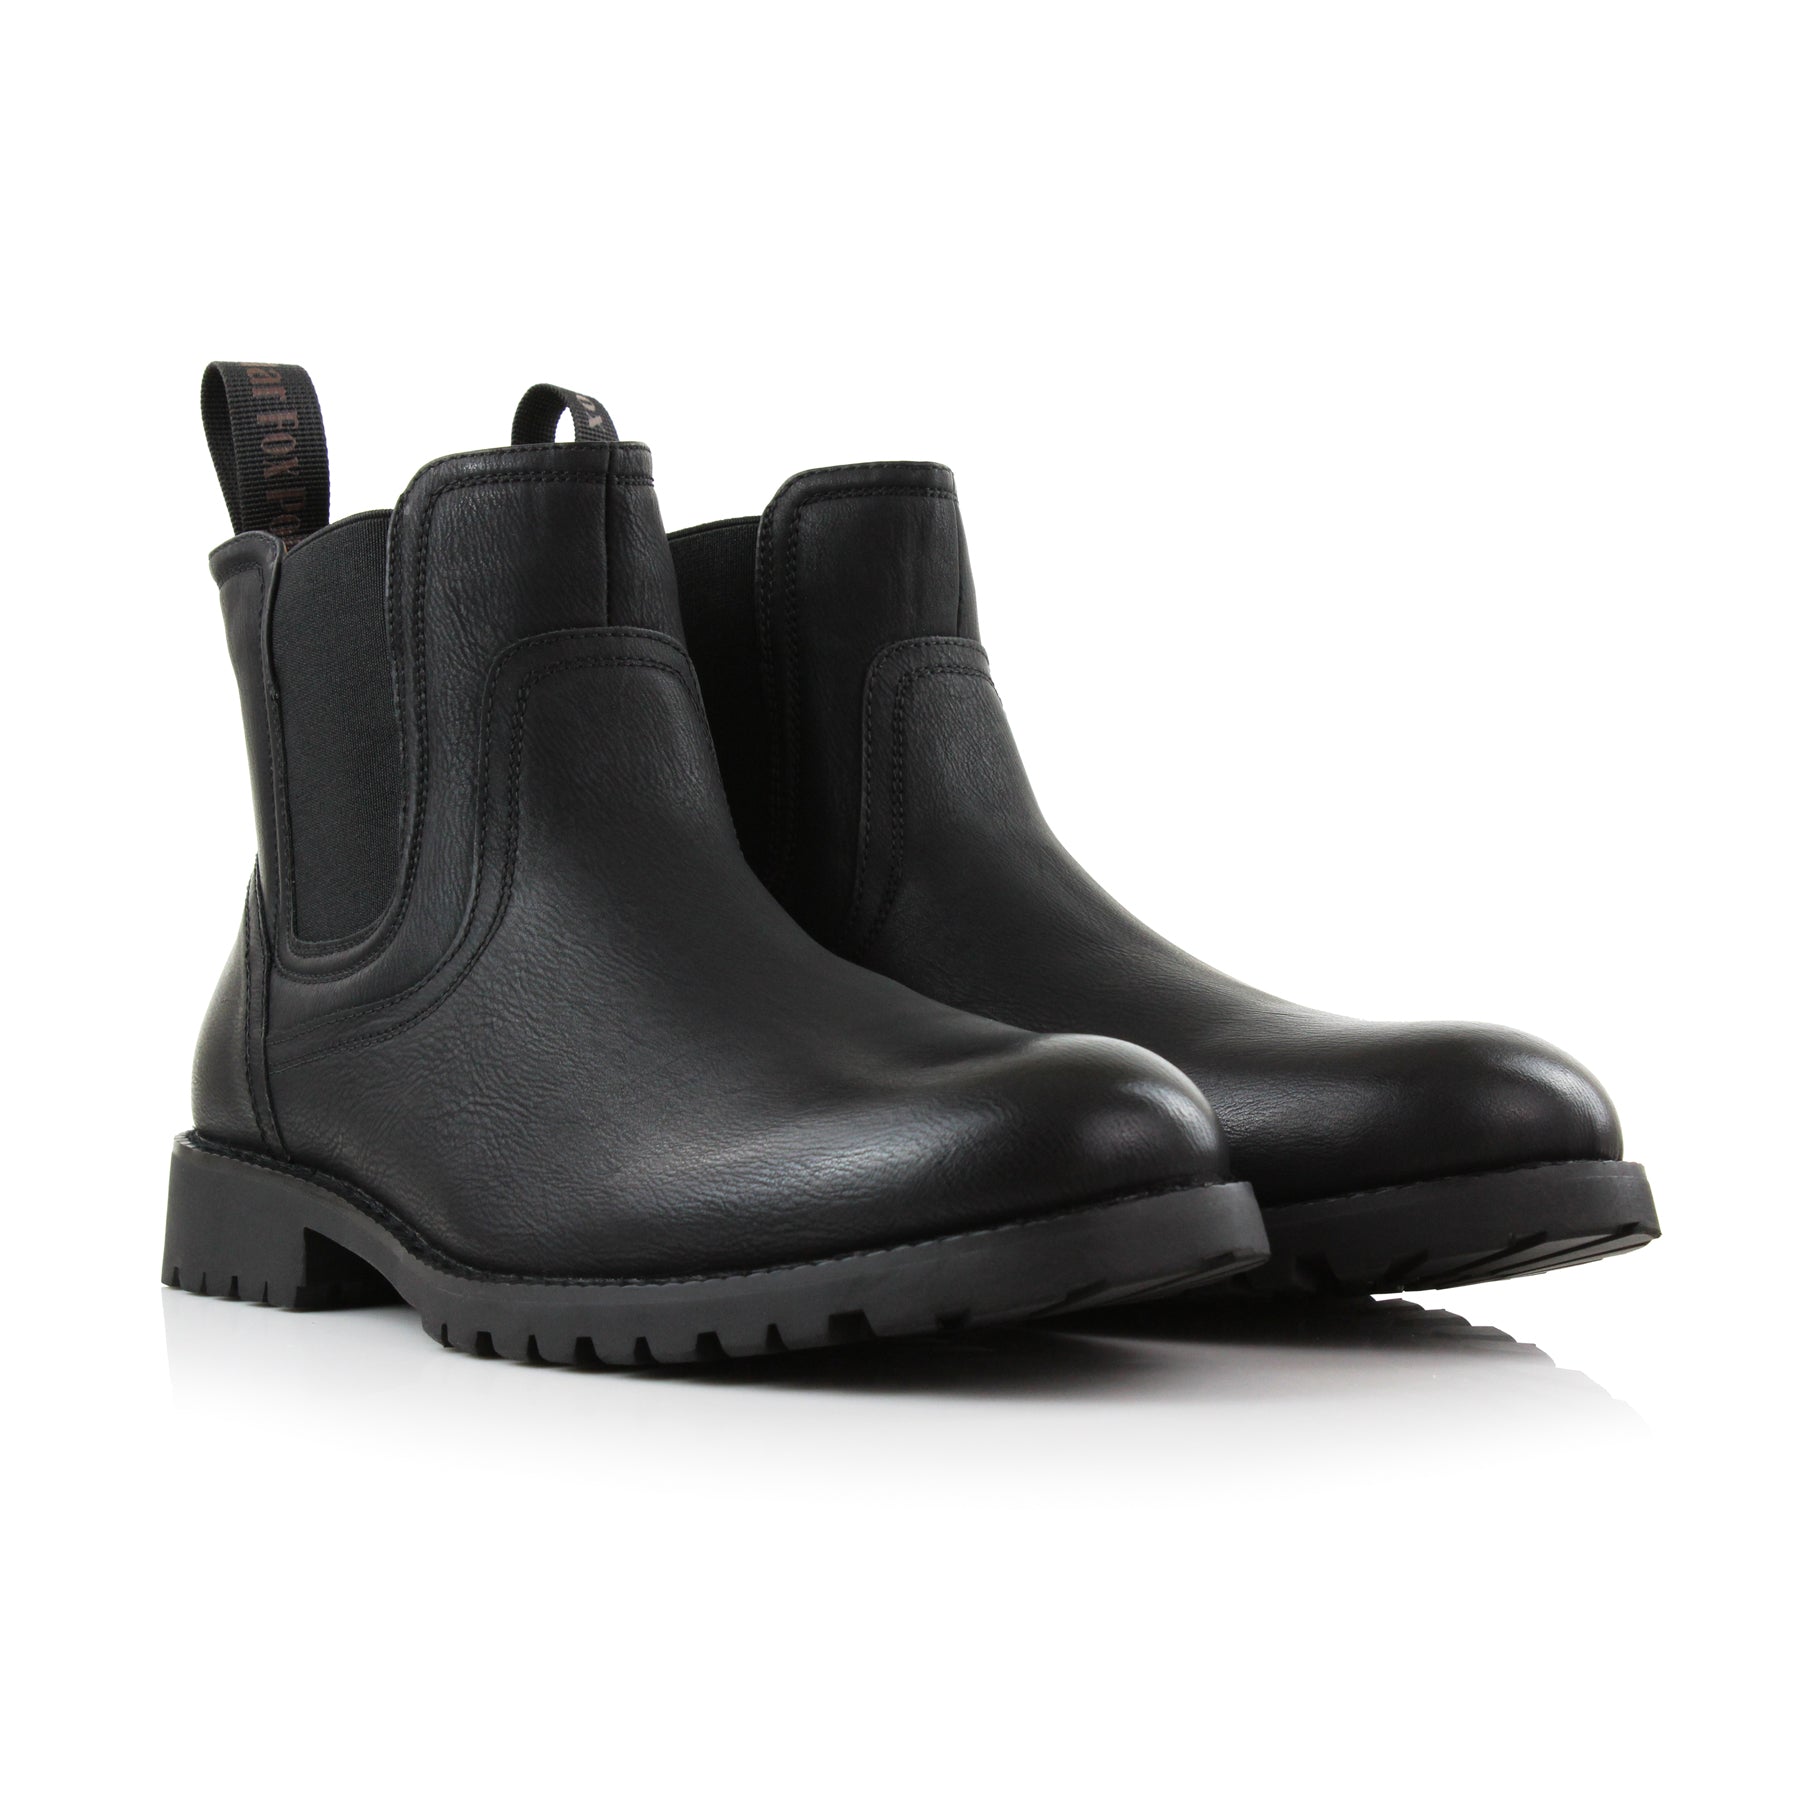 Western Style Chelsea Boots | Duncan by Polar Fox | Conal Footwear | Paired Angle View